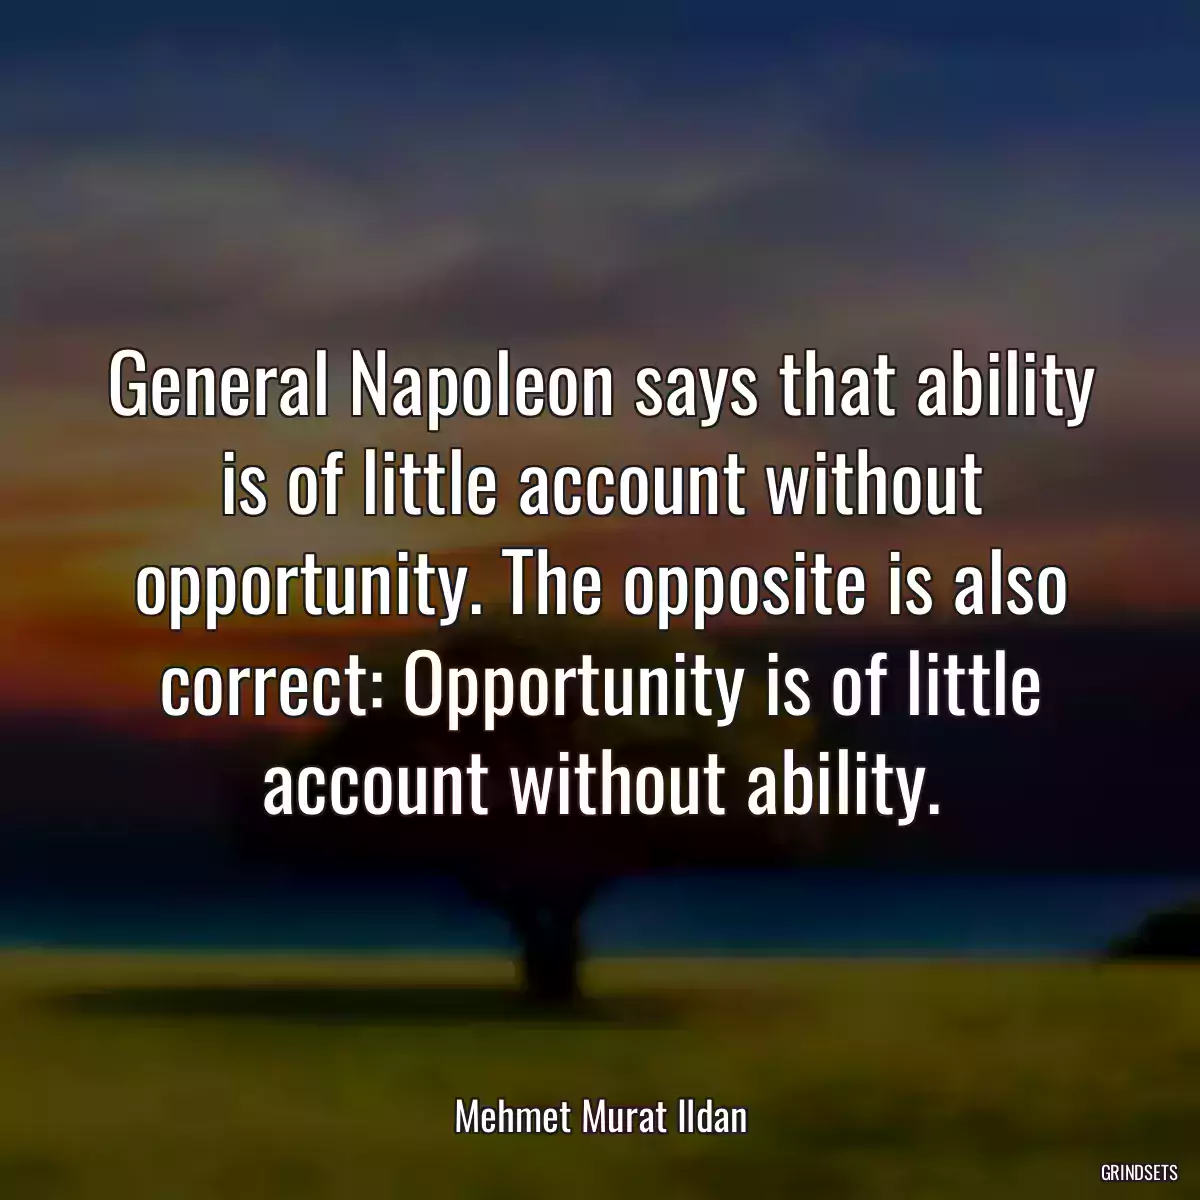 General Napoleon says that ability is of little account without opportunity. The opposite is also correct: Opportunity is of little account without ability.